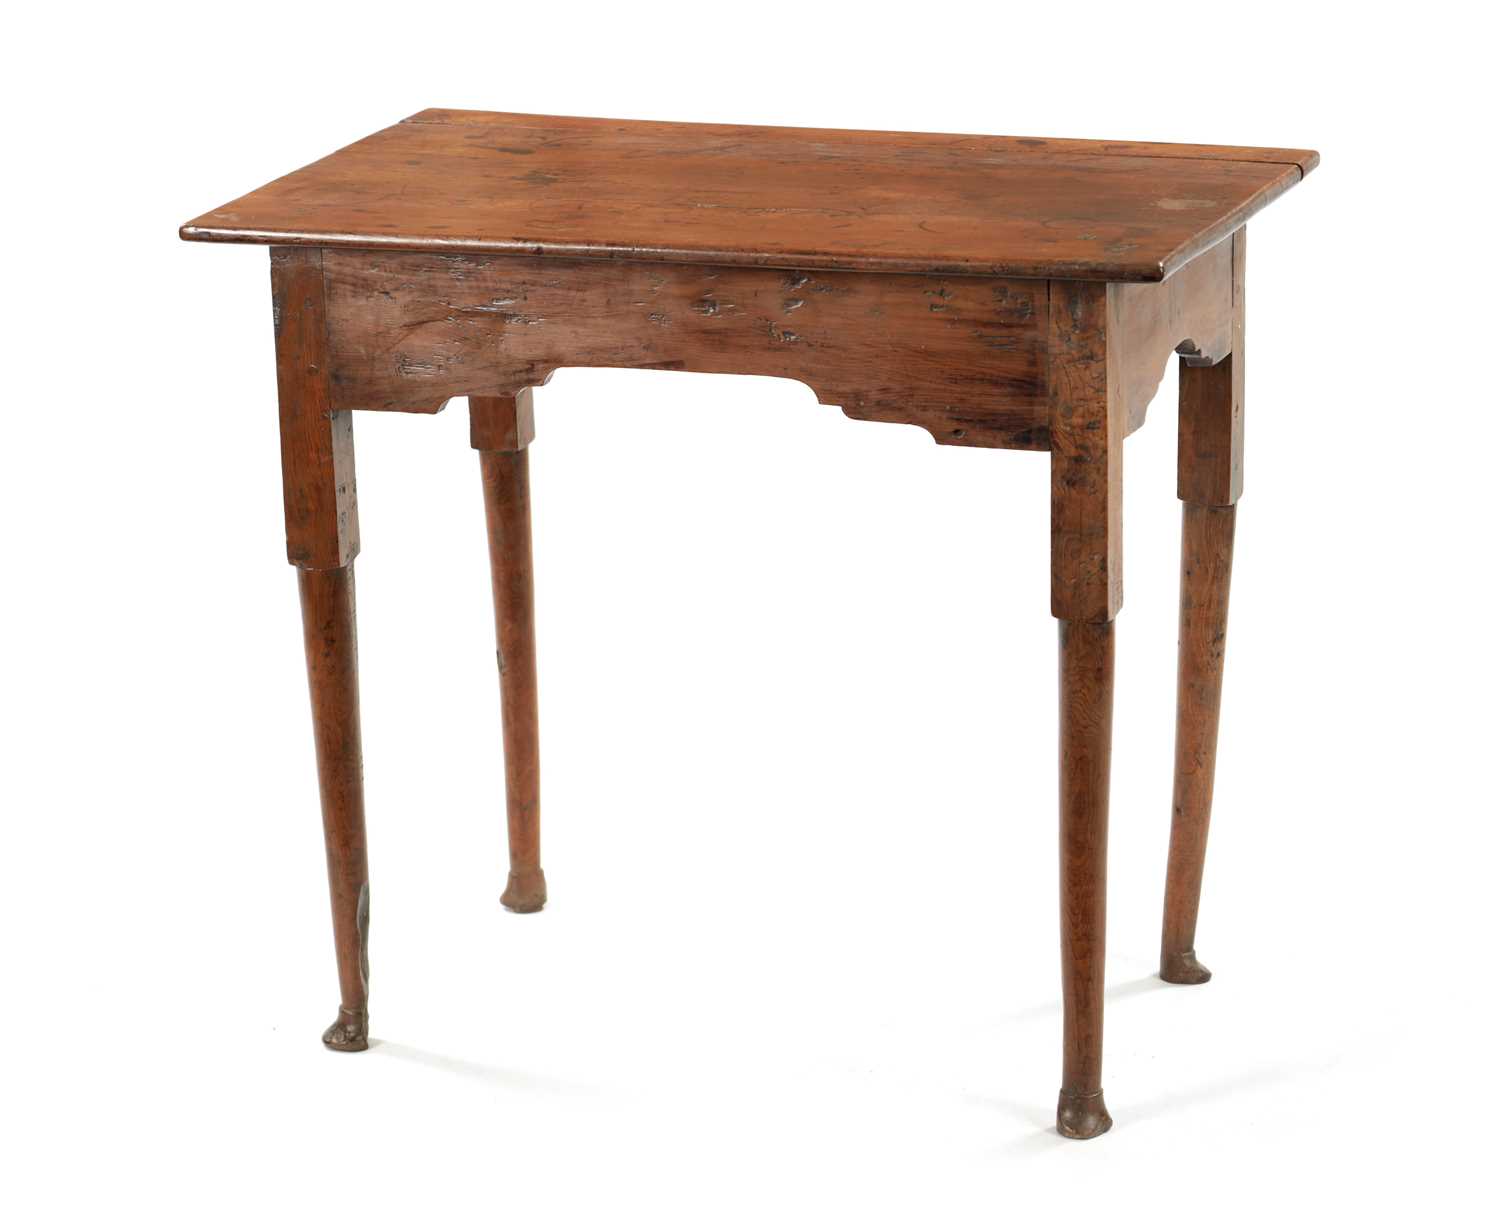 Lot 382 - AN EARLY 18TH CENTURY YEW WOOD SIDE TABLE